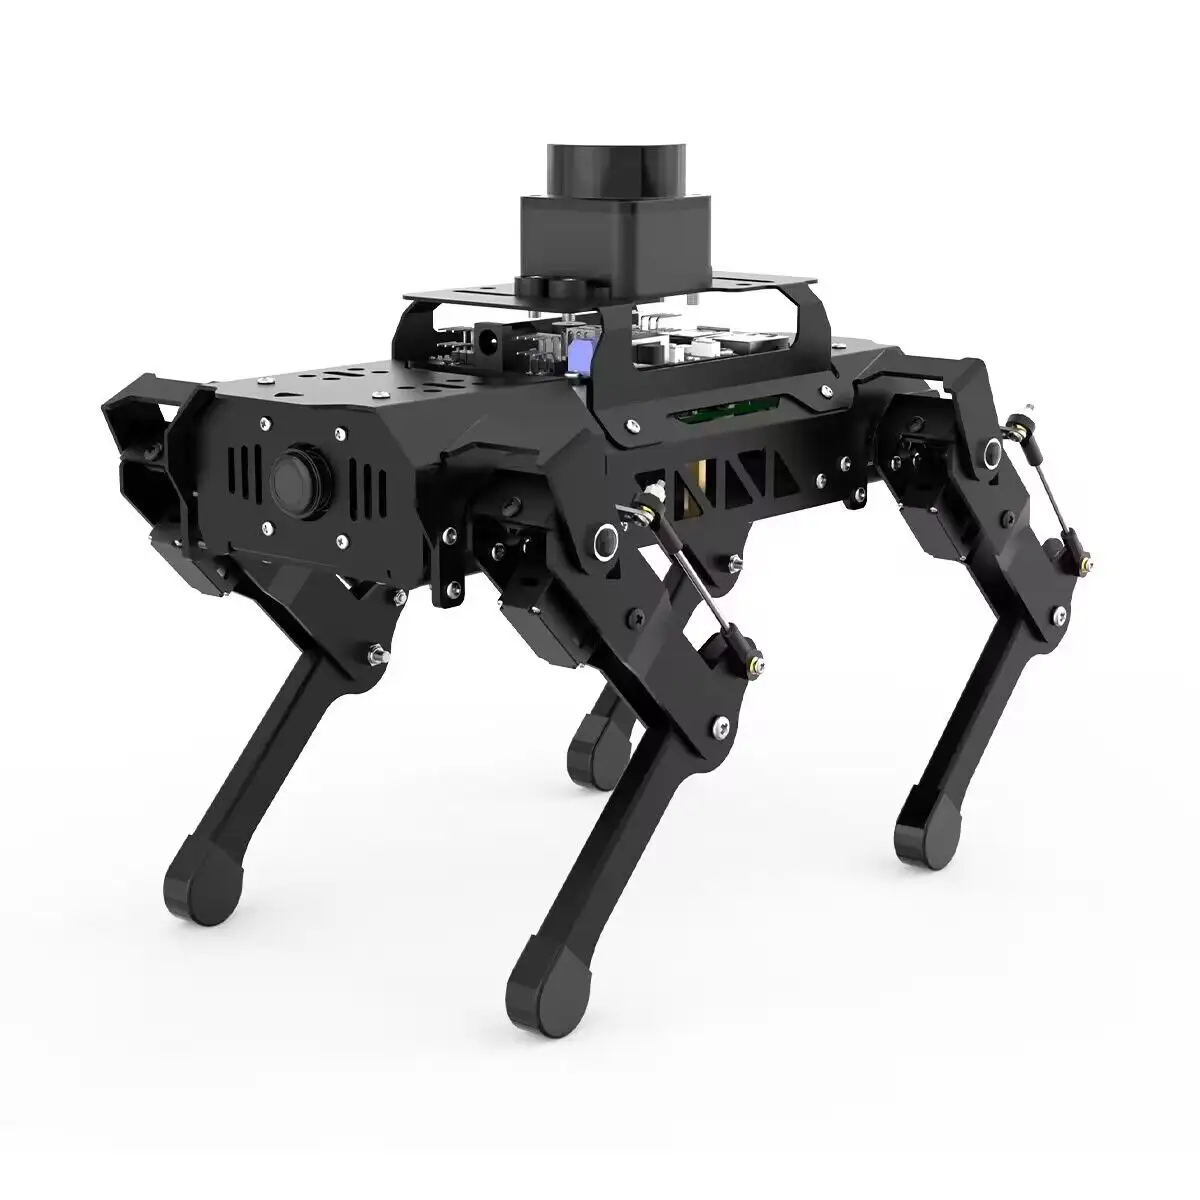 New Arrival High-tech Robot Dog Based on Raspberry Pi and ROS Robot Programming Kit Support Mapping and Navigation